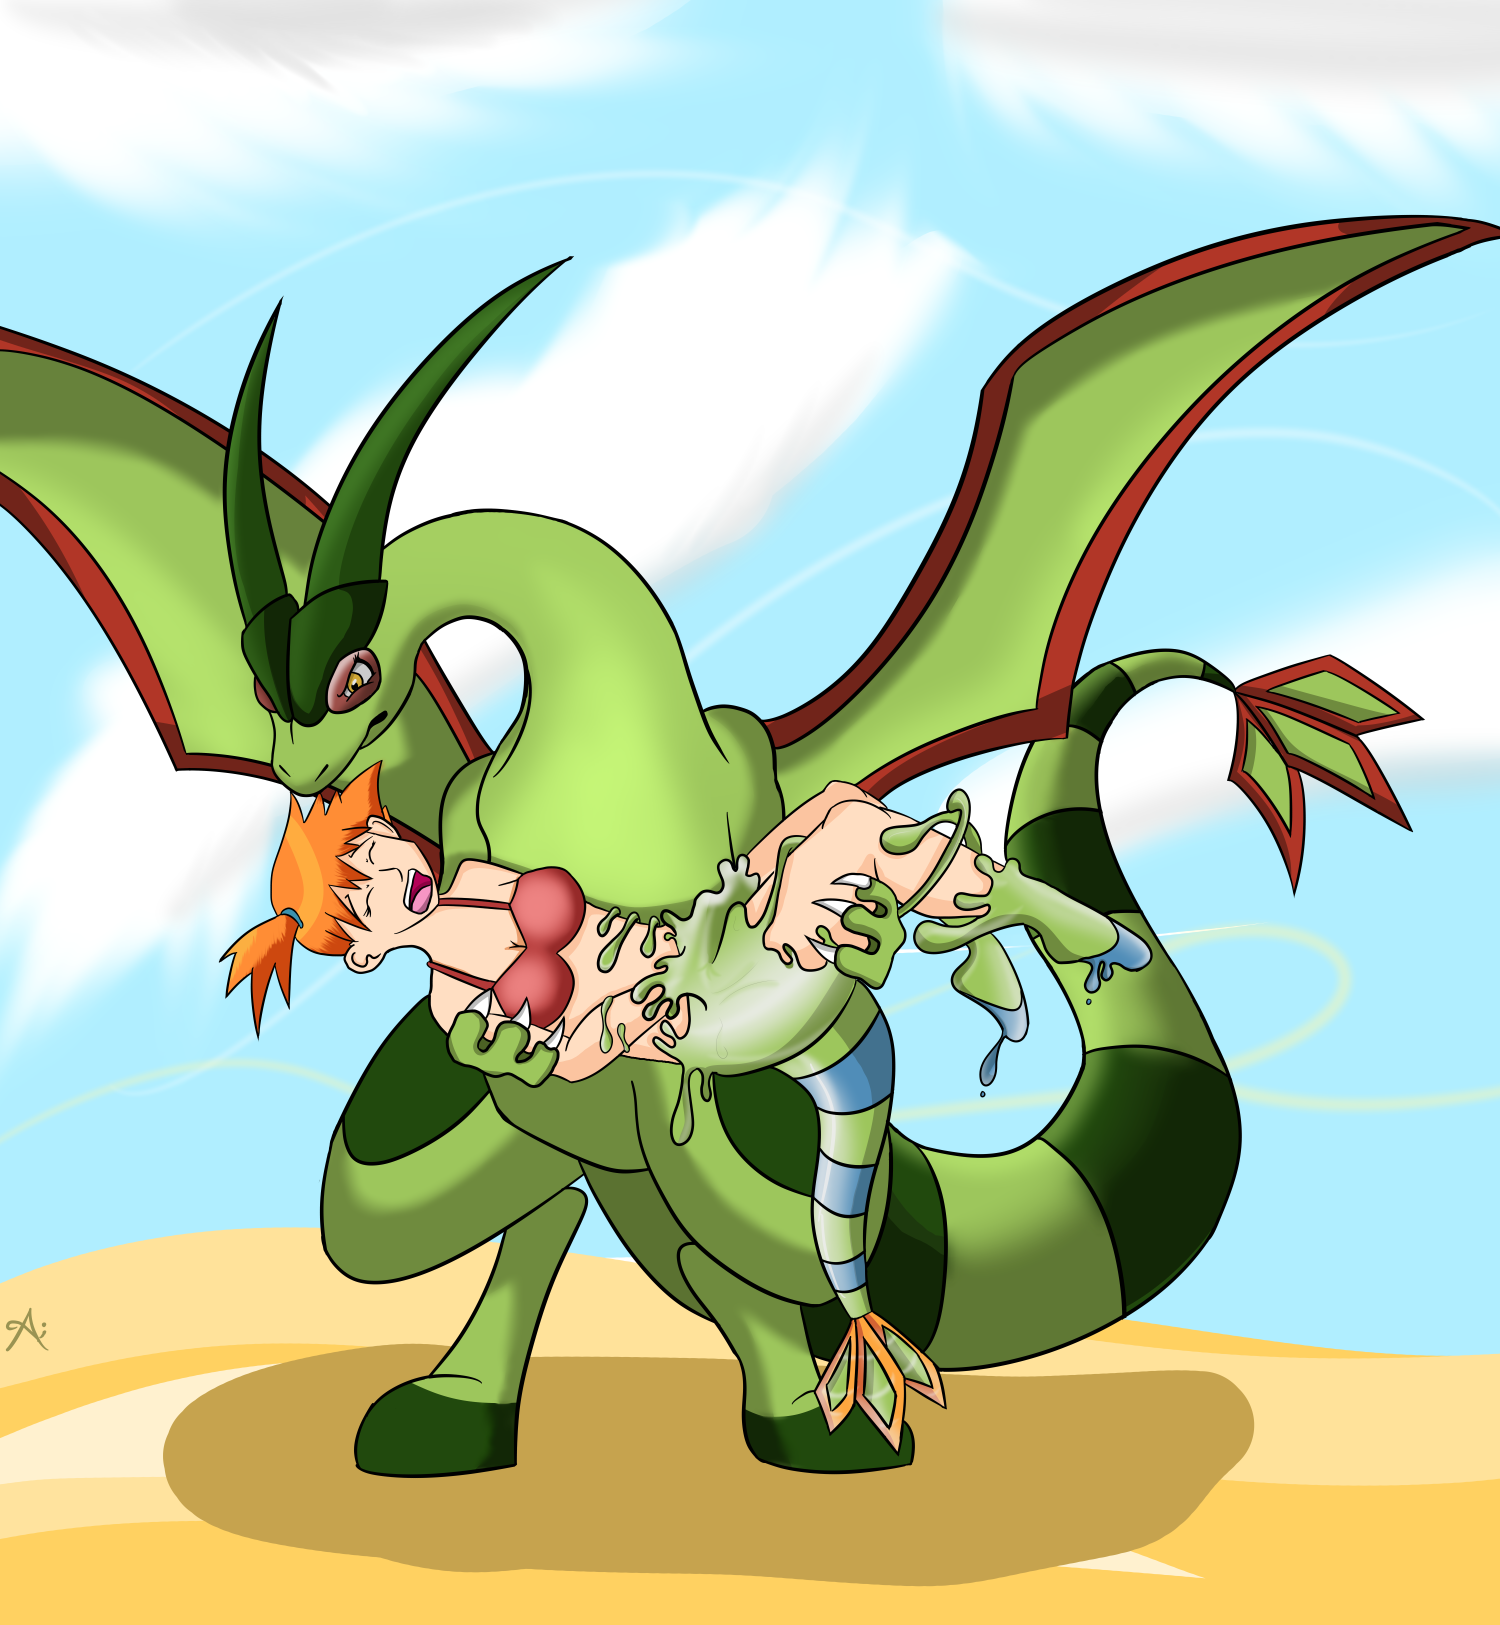 'Gon' with the Wind Rubber Flygon TF. 